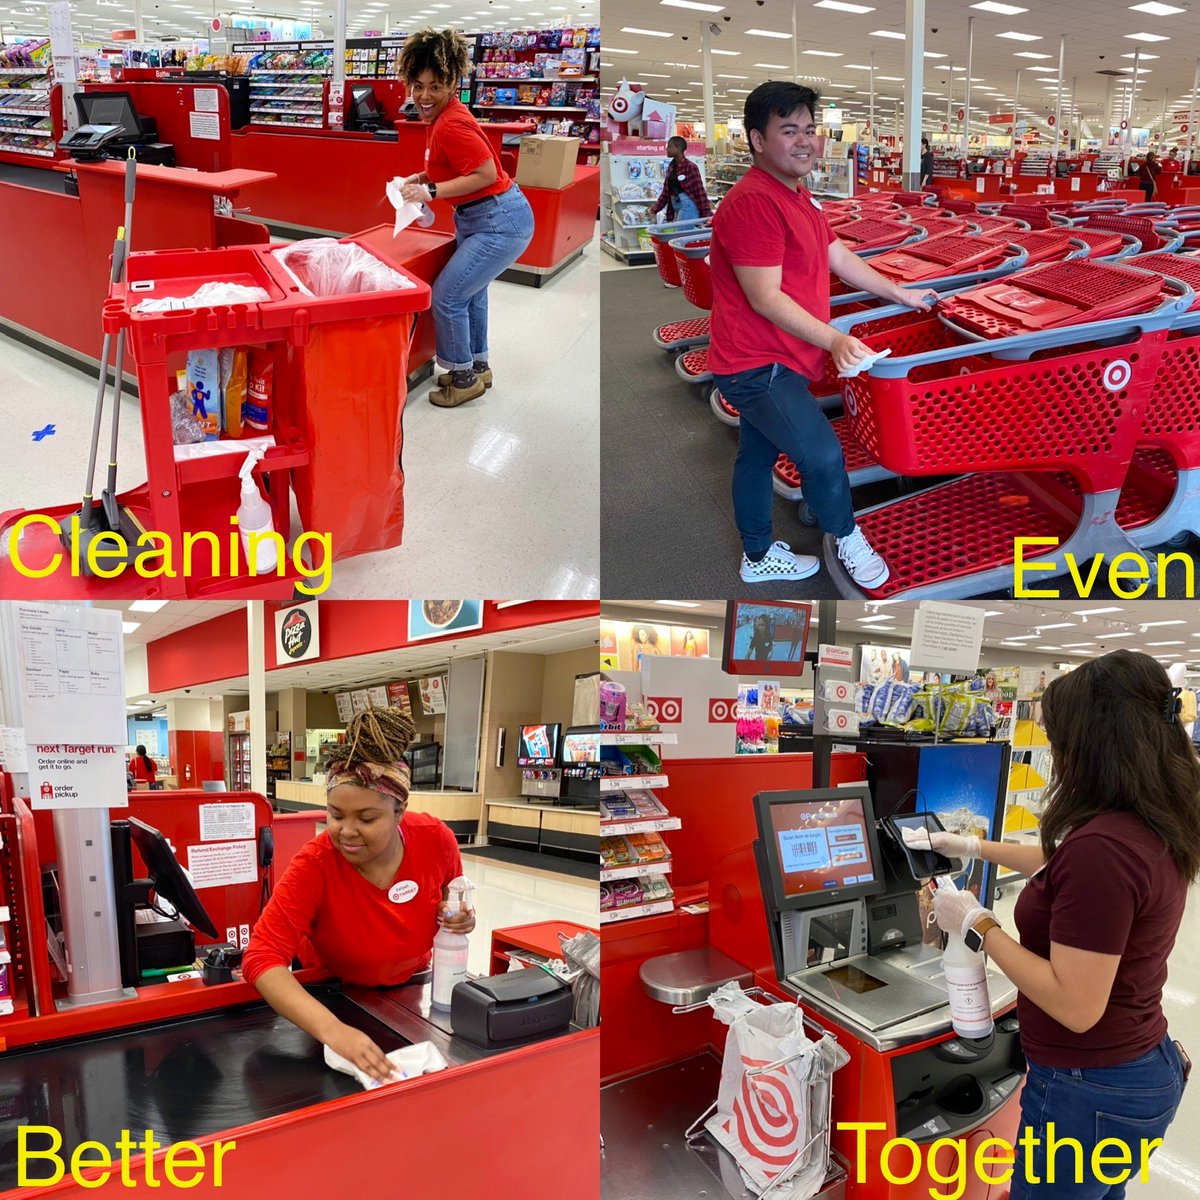 Way to go @bcmixon8 & #T2770VirginiaBch on keeping both our Team and Guest safe to get the necessities they need! #StrongerTogether #essentialwork @Target @AbbyRollman